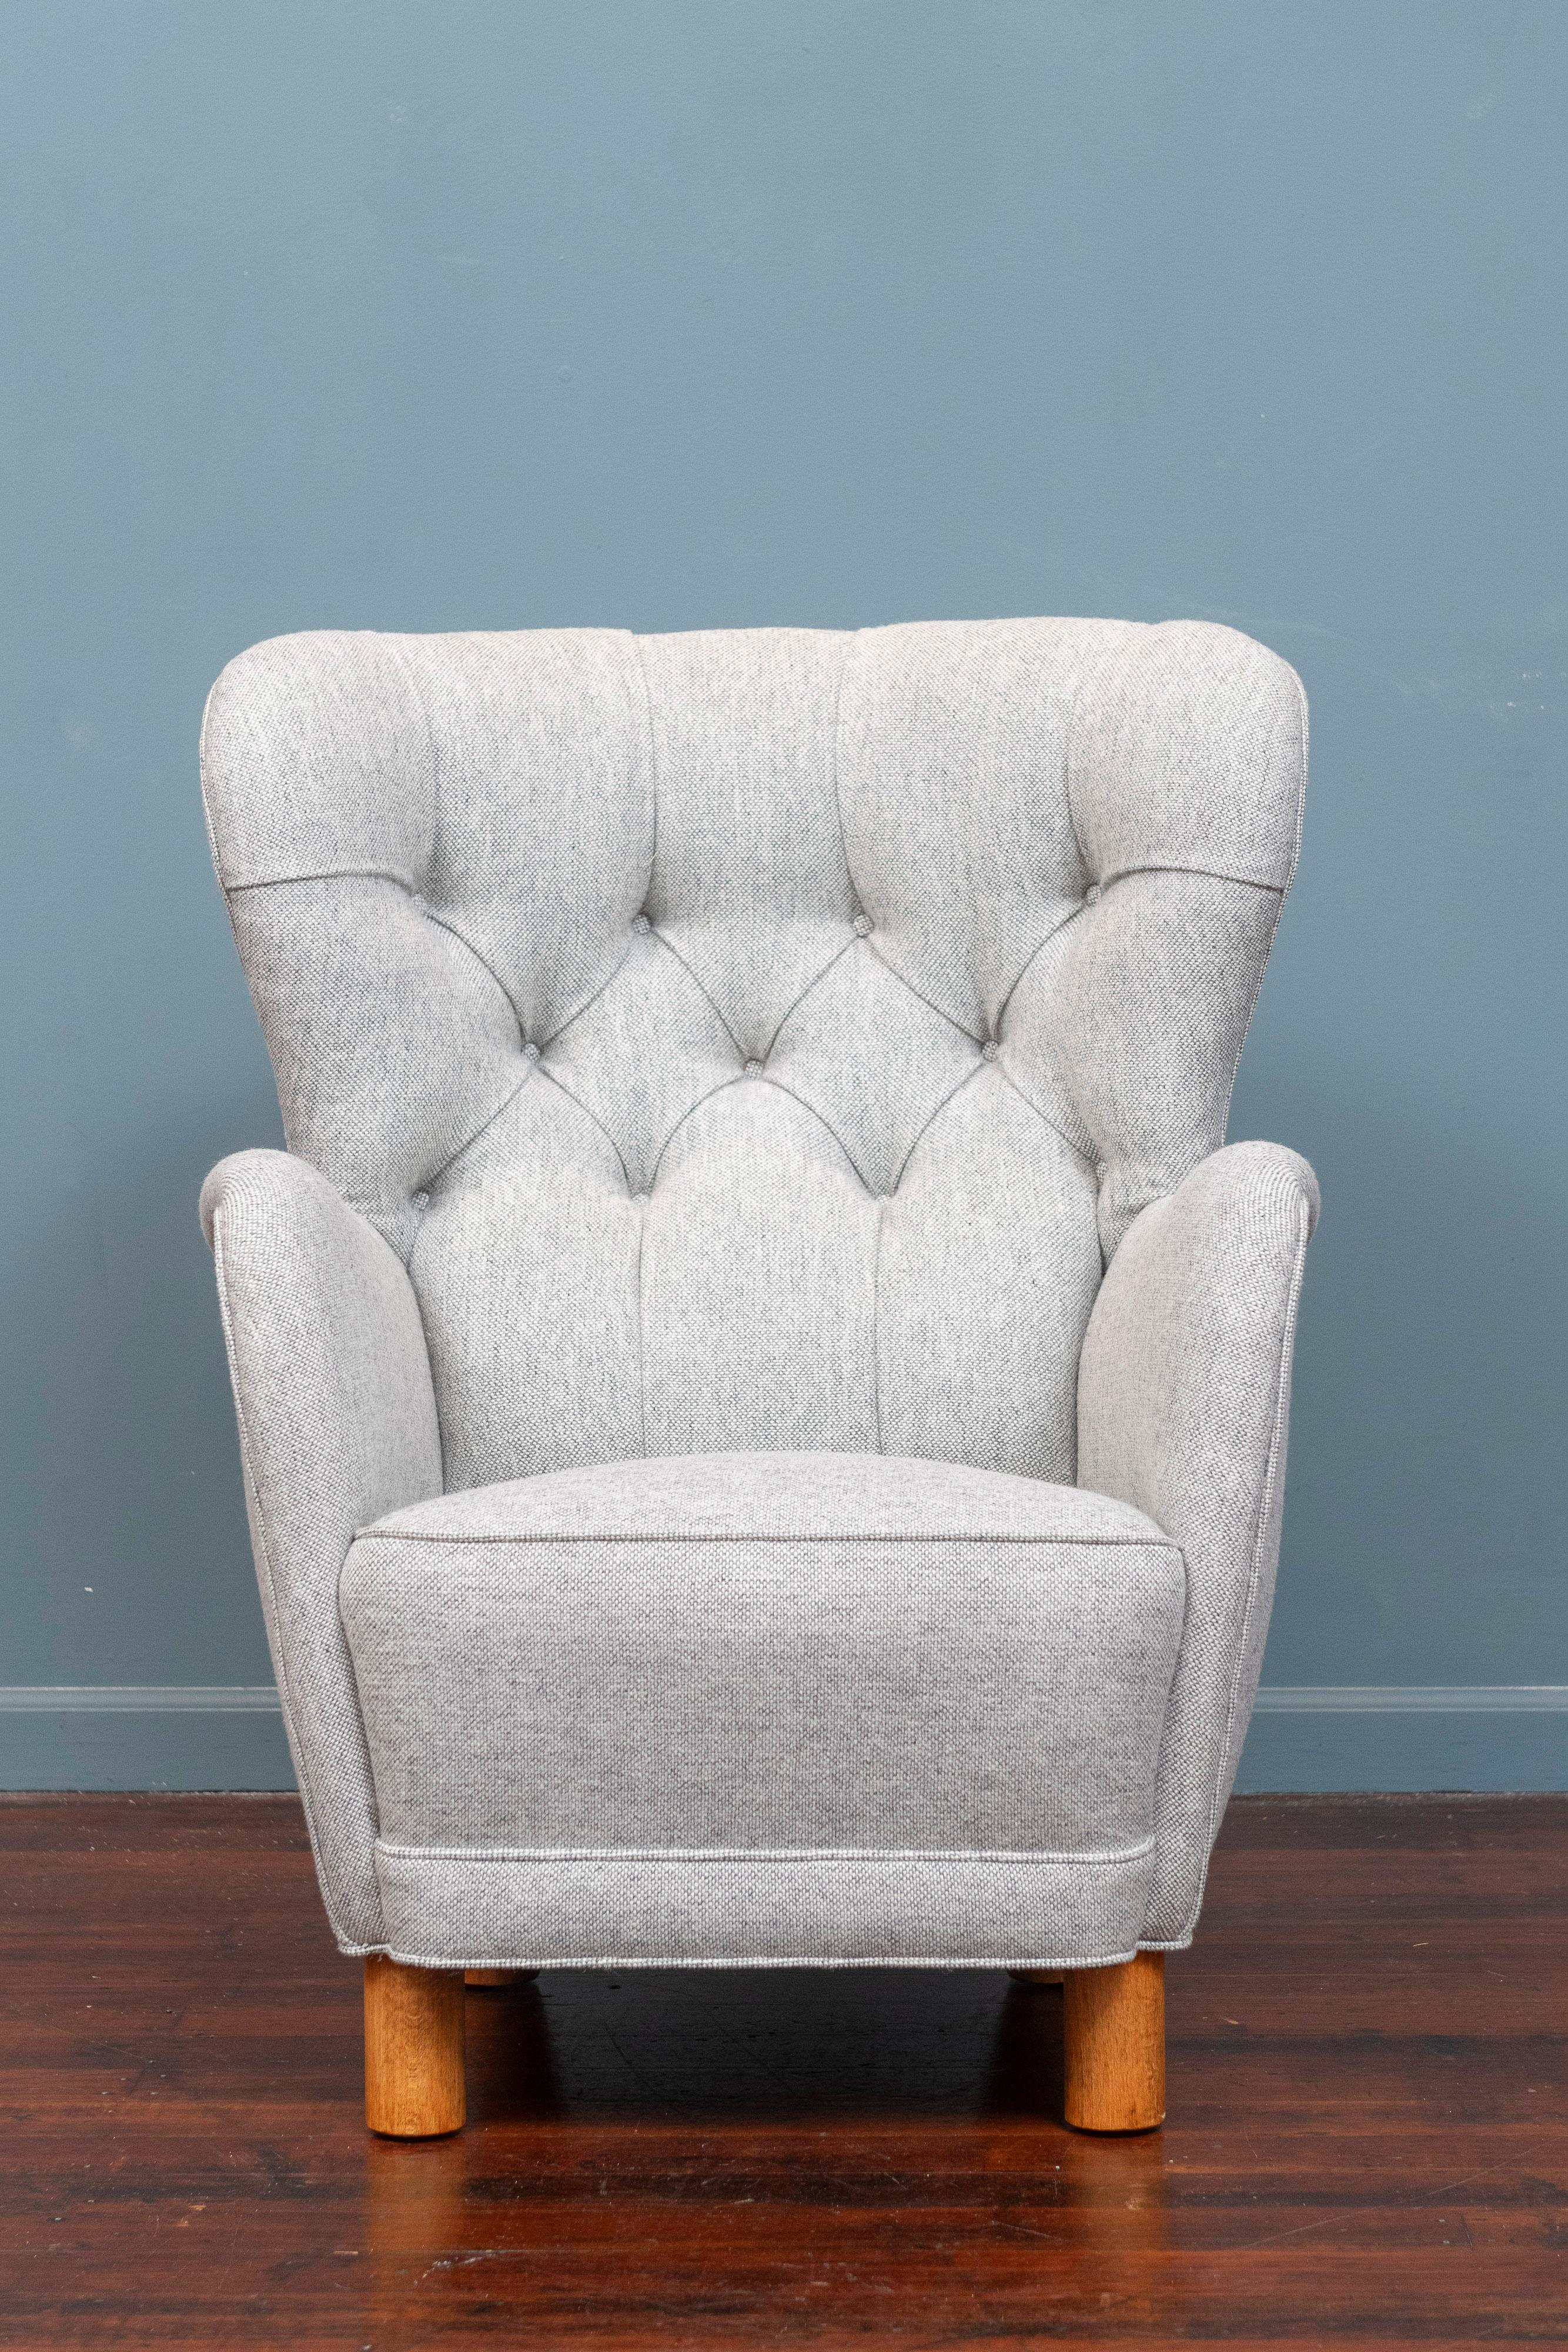 Kay Otto Fisker design wing chair, newly refinished and upholstered in Maharam Nanna Ditzel wool. A rare model chair executed with high quality construction and materials that wraps around you for a very comfortable sit. Perfect for reading or in